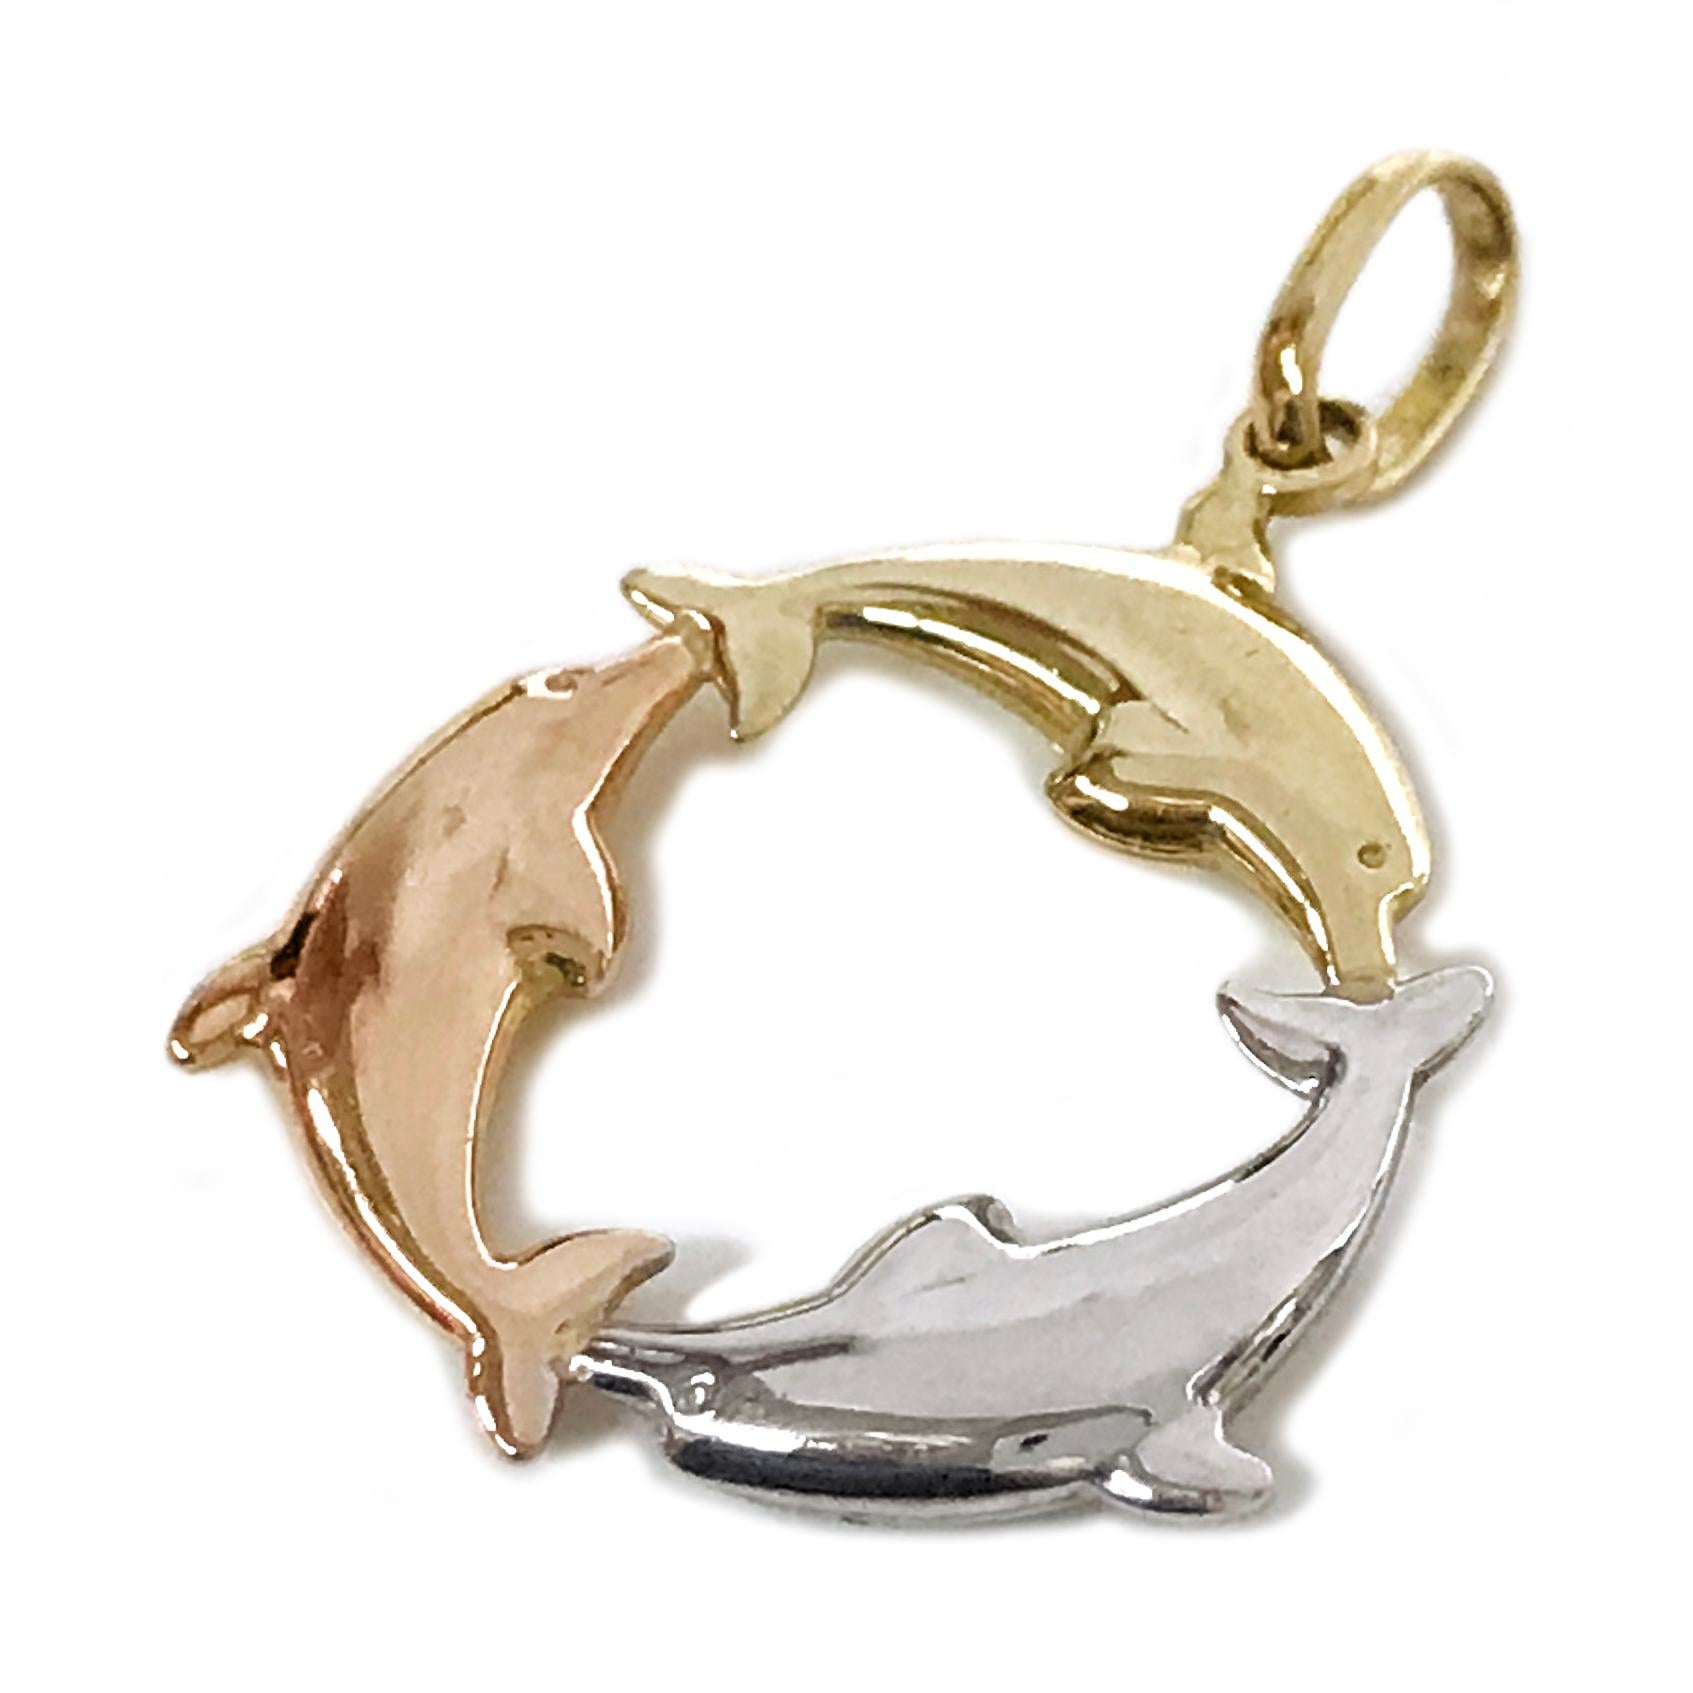 14 Karat Tri-Gold Dolphin Pendant. The pendant features a yellow gold, white gold, and rose gold dolphin connected to create a circle. The pendant measures 20mm tall x 19.25mm wide. Stamped on the back is AU 14K TURKEY. The total gold weight of the